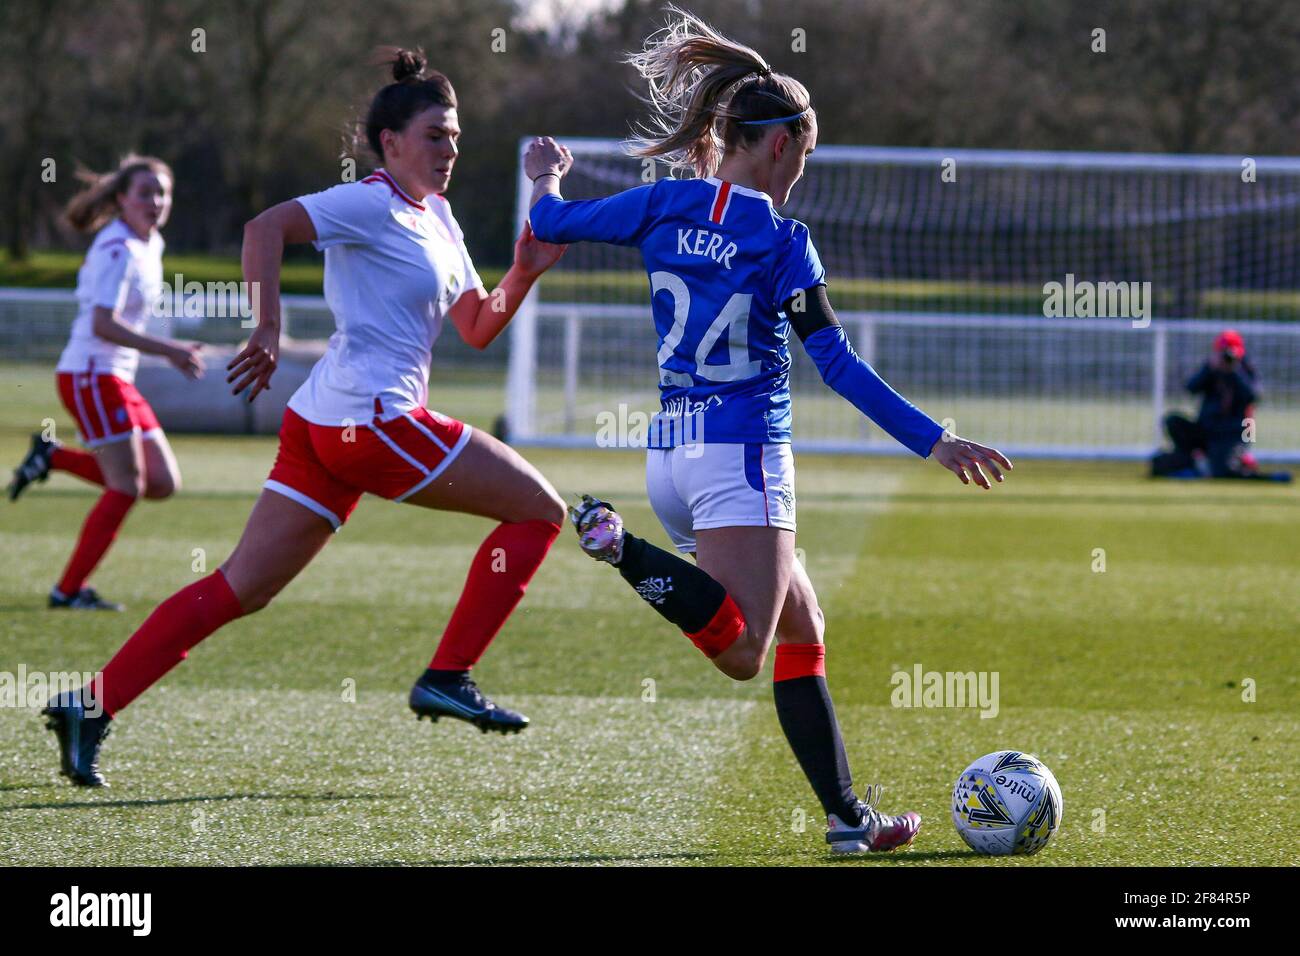 Glasgow, UK. 11th Apr, 2021. Sam Kerr (#24) of Rangers Women FC during the Scottish Building Society SWPL1 Fixture Rangers FC vs Spartans FC at Rangers Training Centre, Glasgow, 11/04/2021 | Images courtesy of www.collargeimages.co.uk Credit: Colin Poultney/Alamy Live News Stock Photo